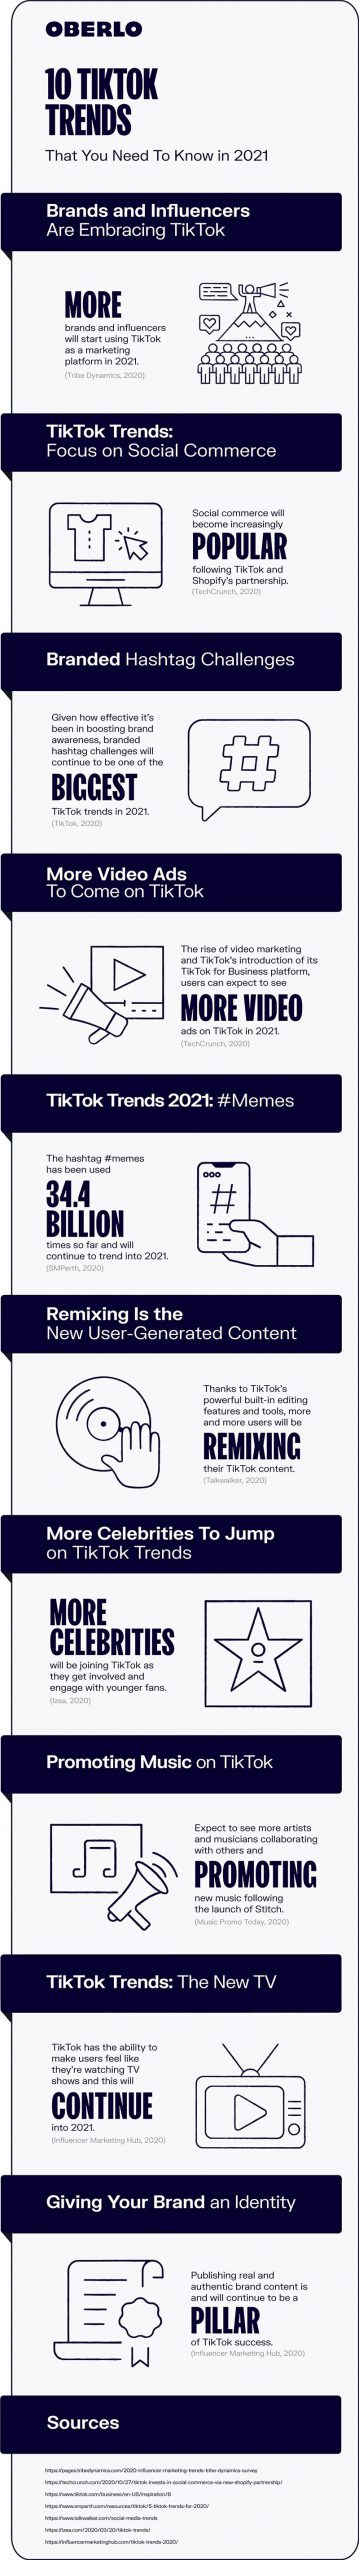 10 tiktok trends to guide your social media strategy in 2021 infographic scaled 1